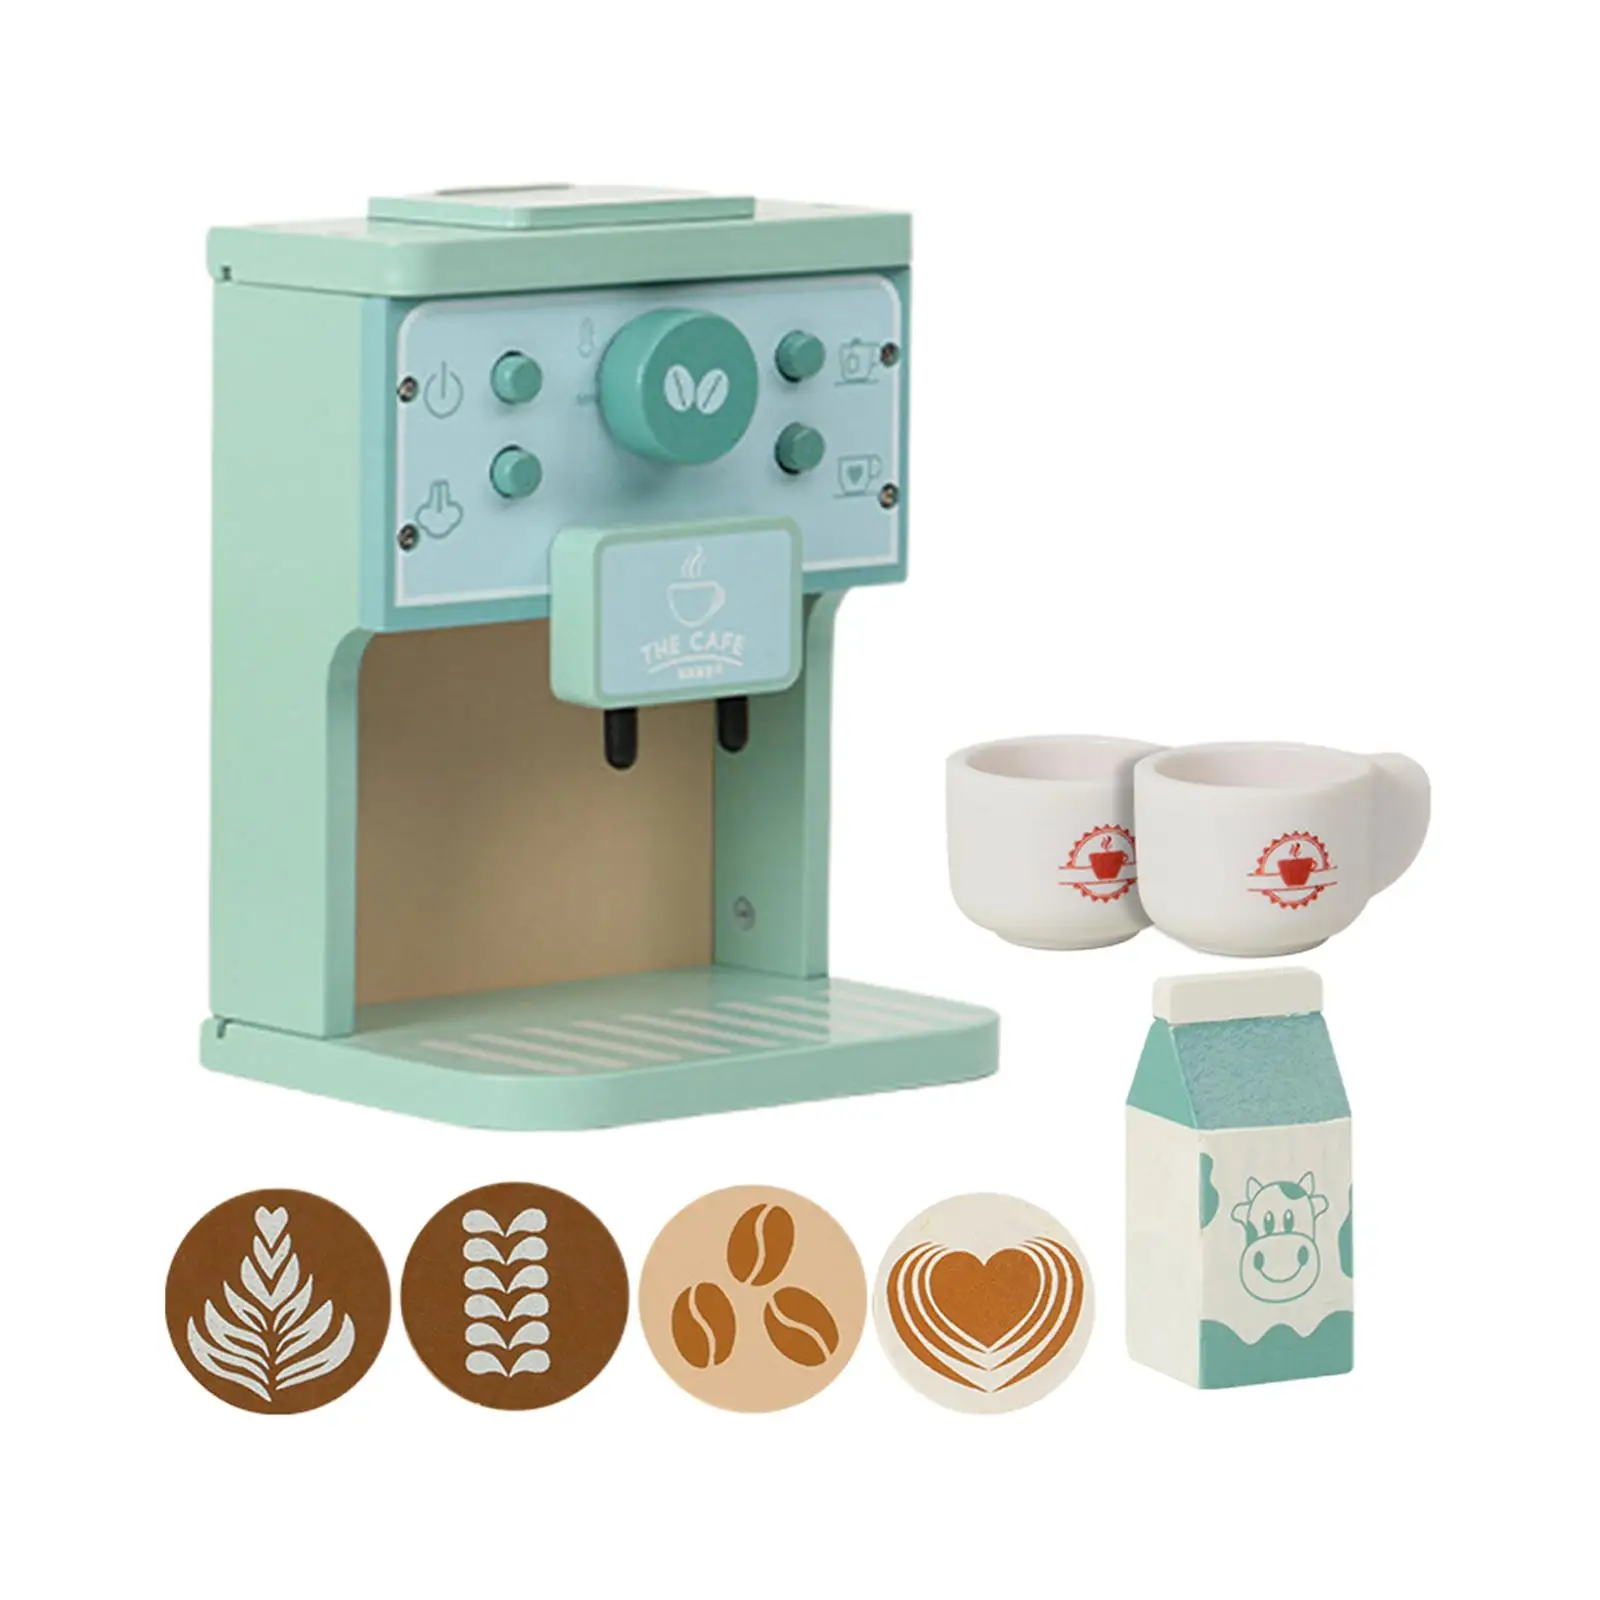 8x Pretend Play Kitchen Accessories Small Appliances Toys Wooden Coffee Maker Set for Children Kids Girls Boys Toddlers Gifts